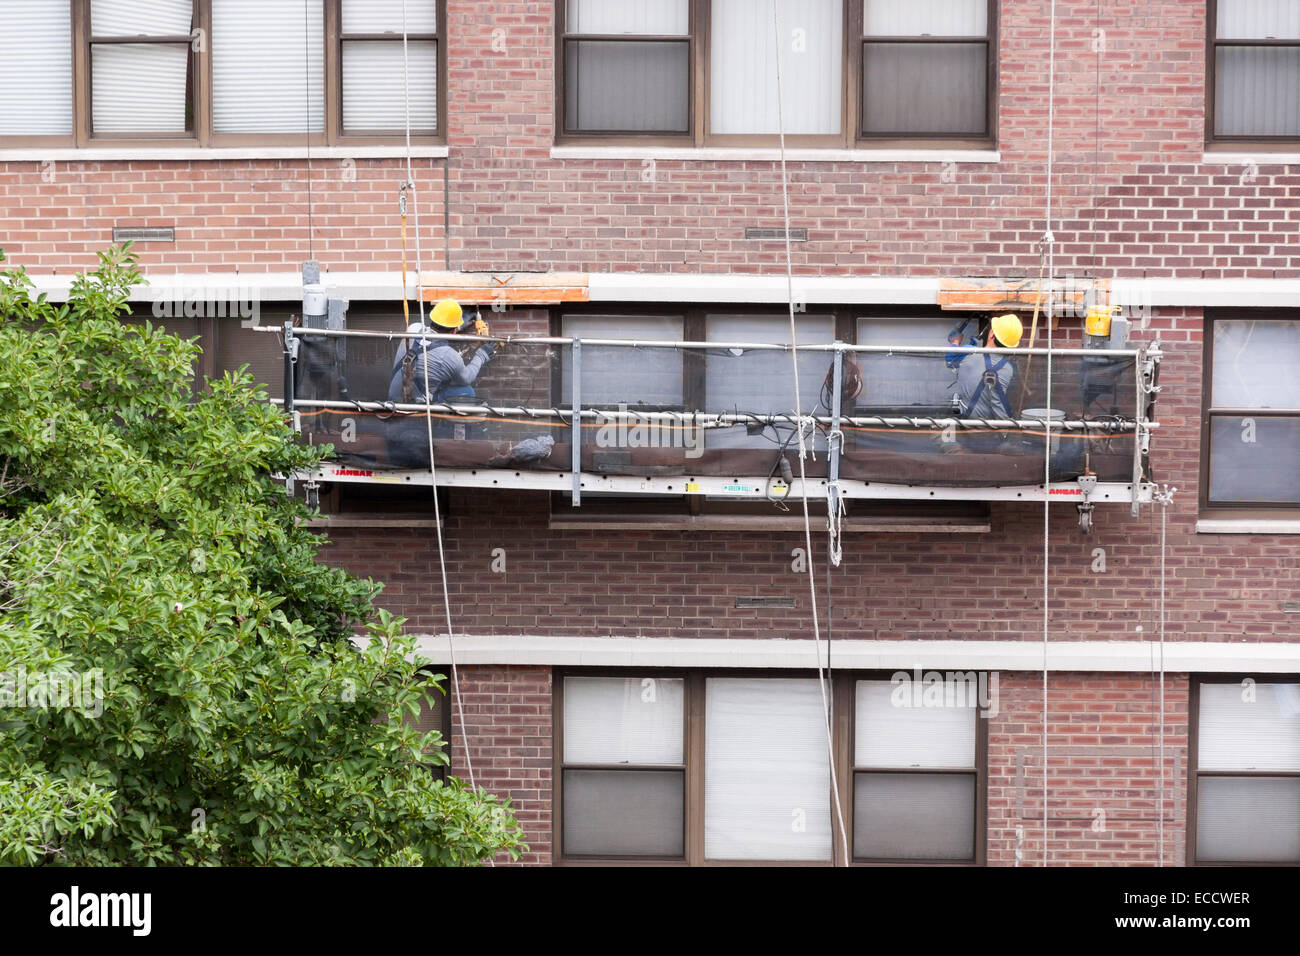 Workers repairing a high-rise apartment building lintel. Stock Photo